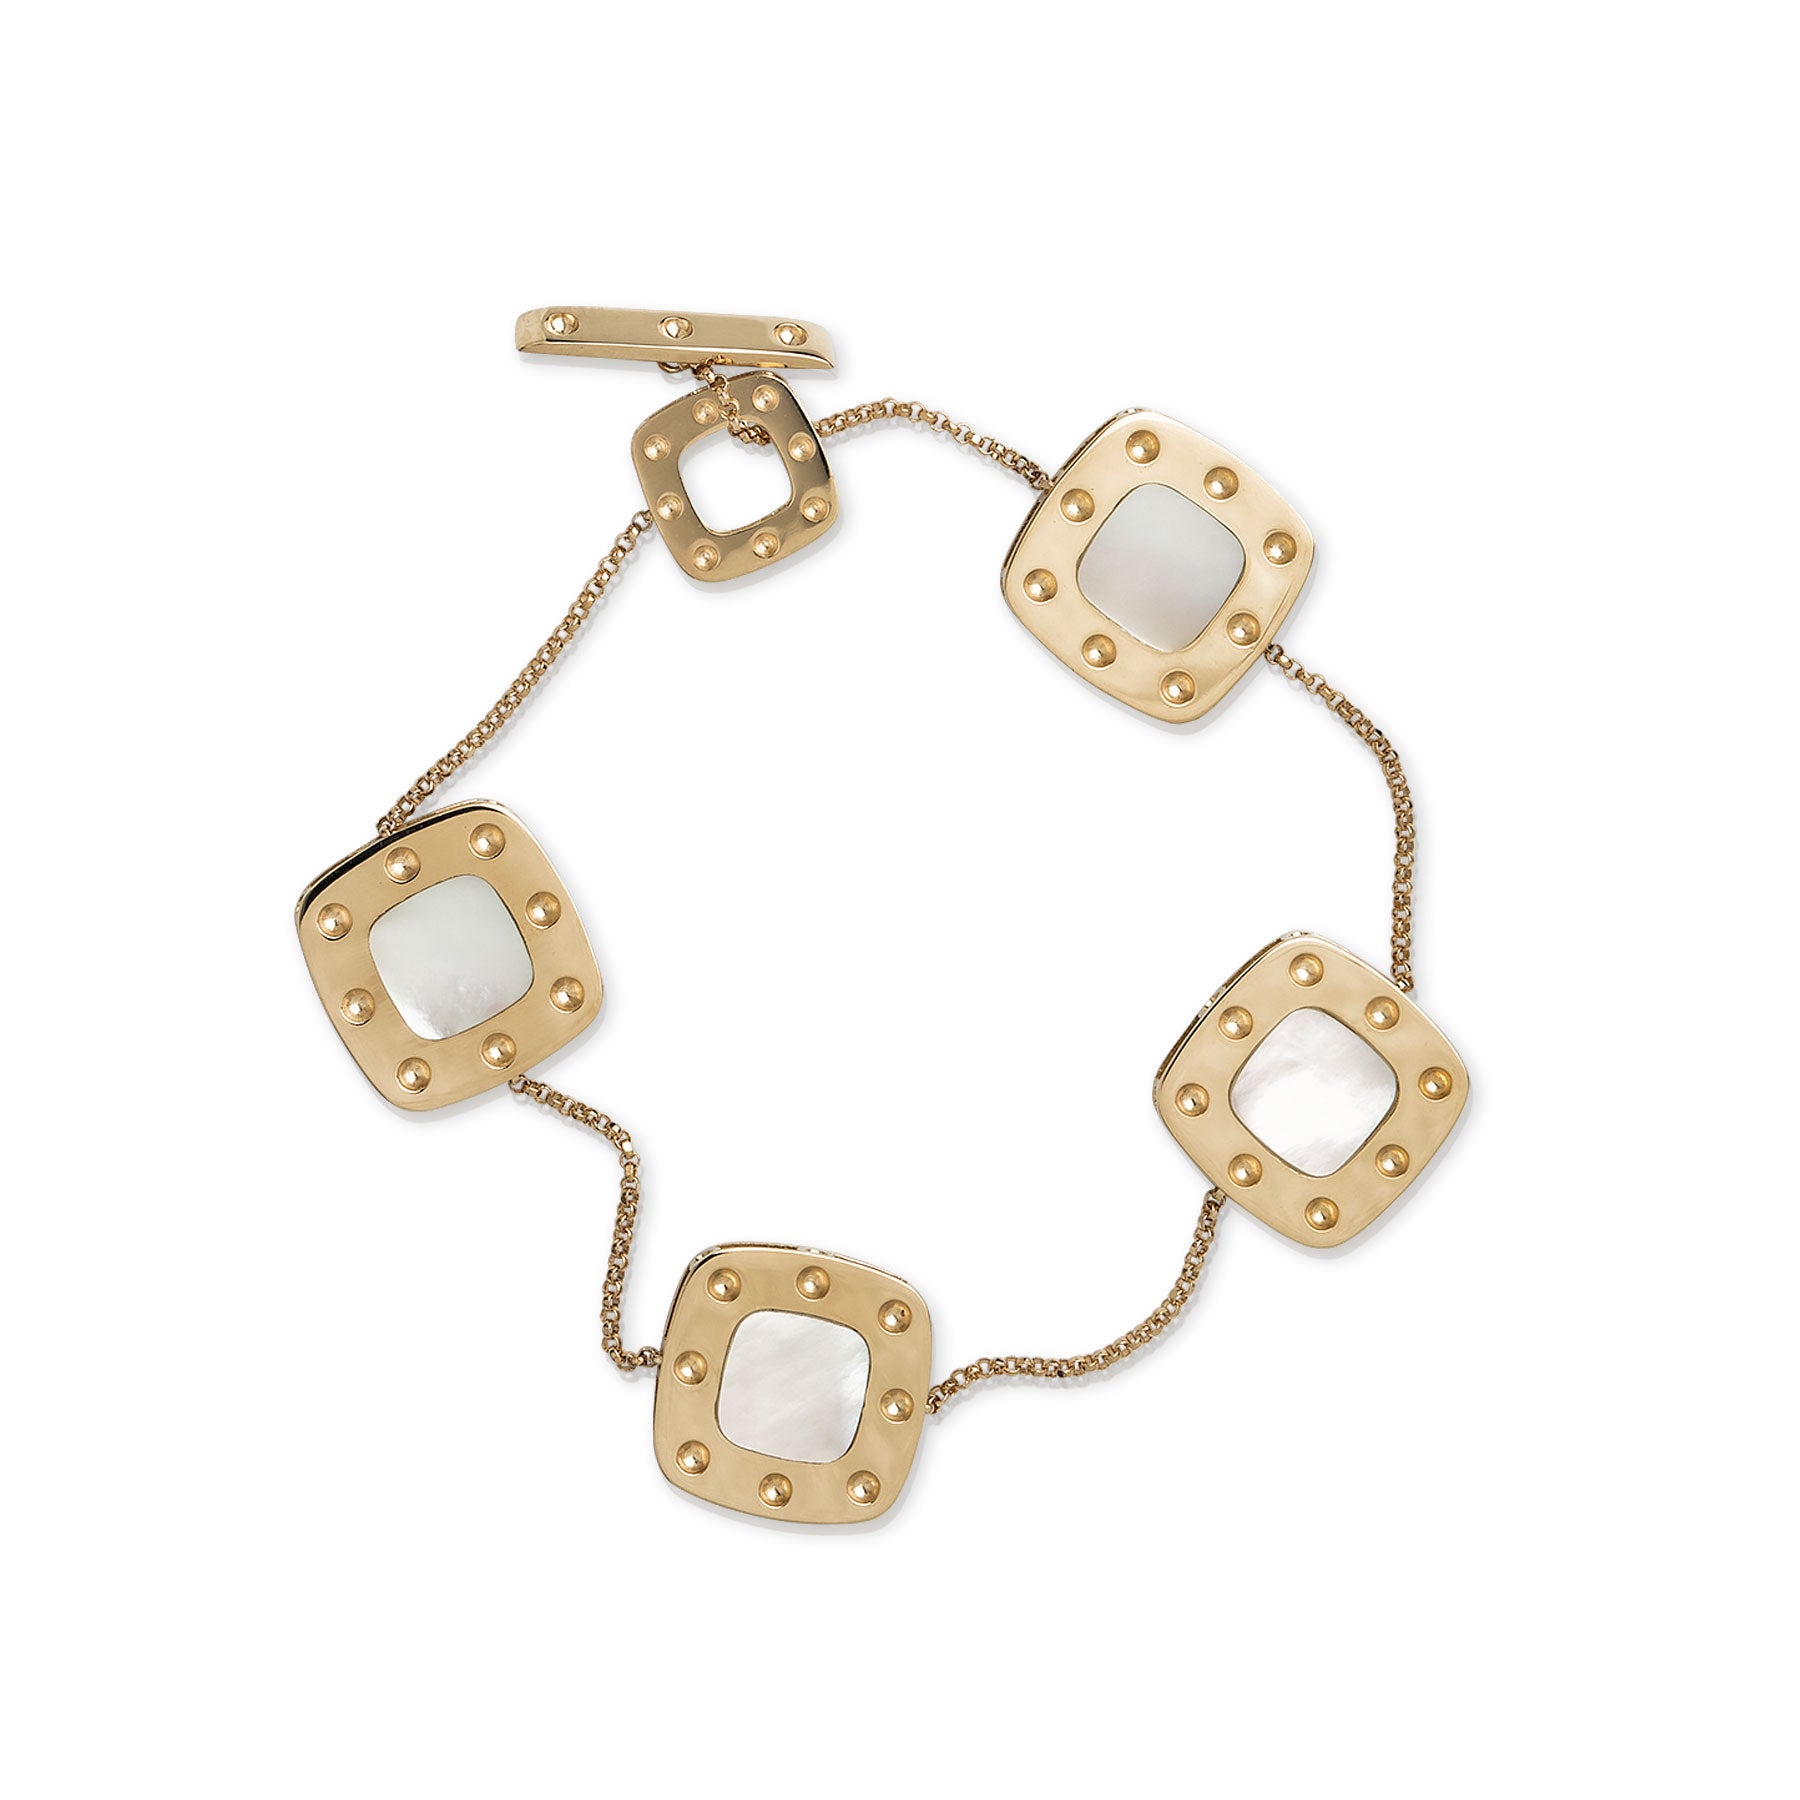 POIS MOI MINI BRACELET WITH MOTHER OF PEARL